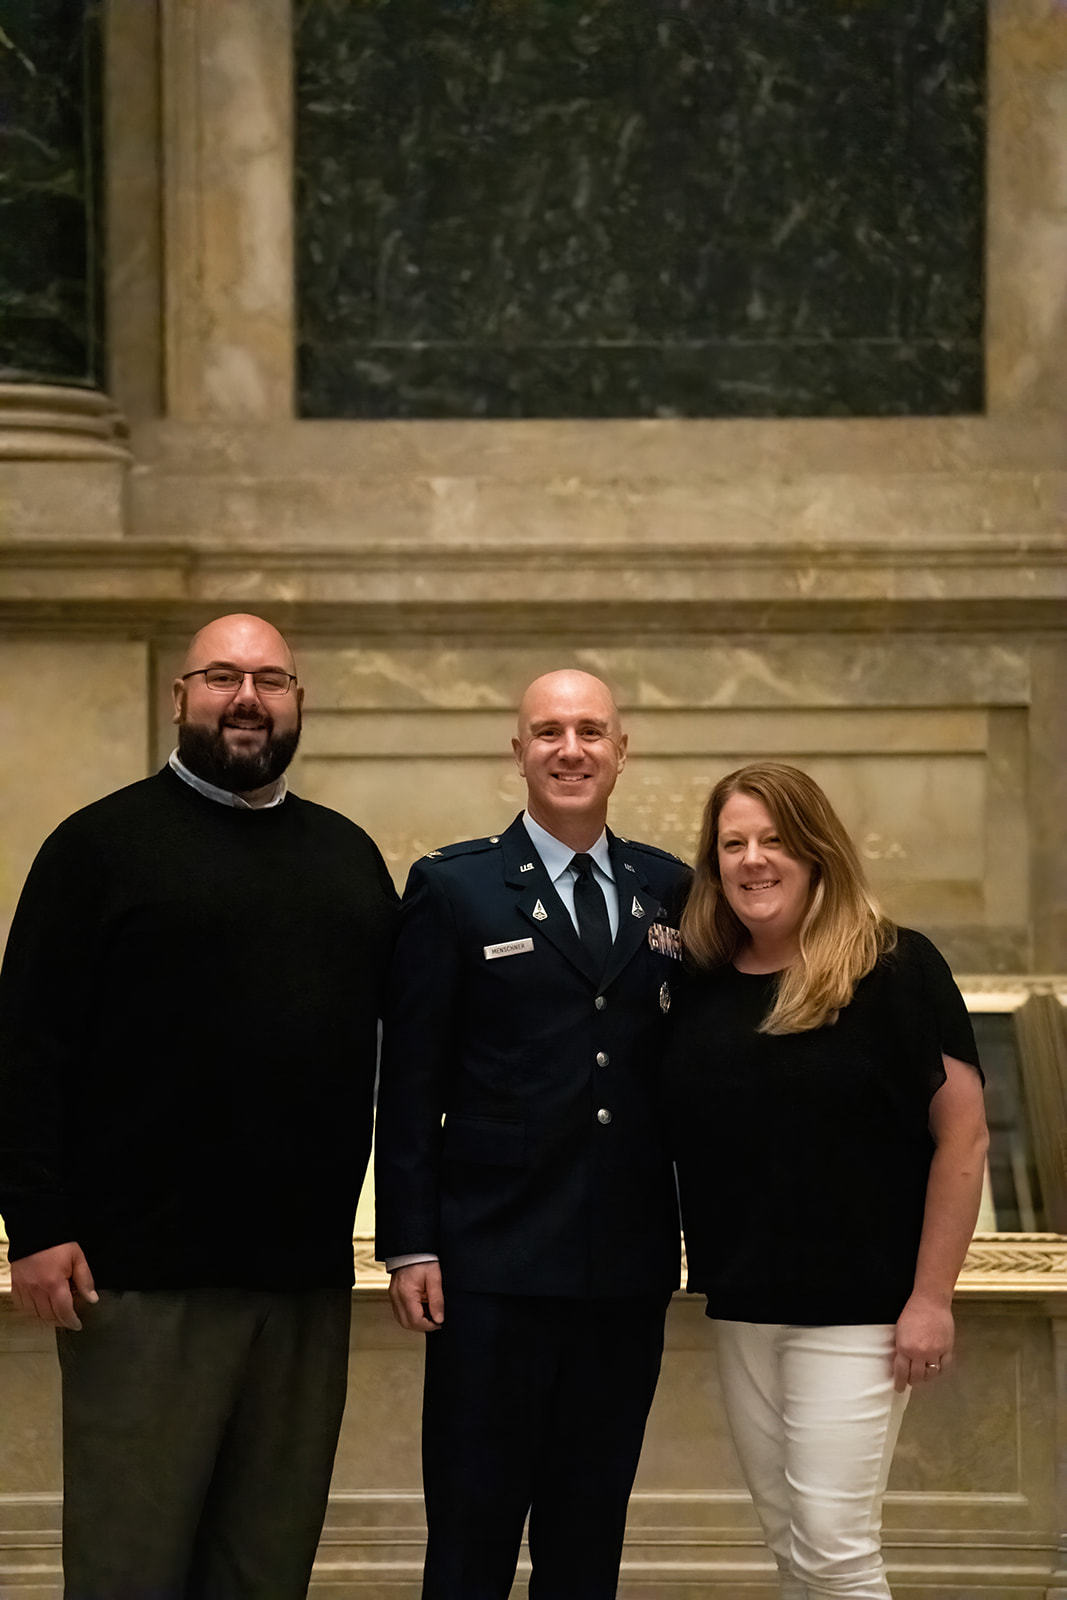 Promotion Ceremony at the National Archives